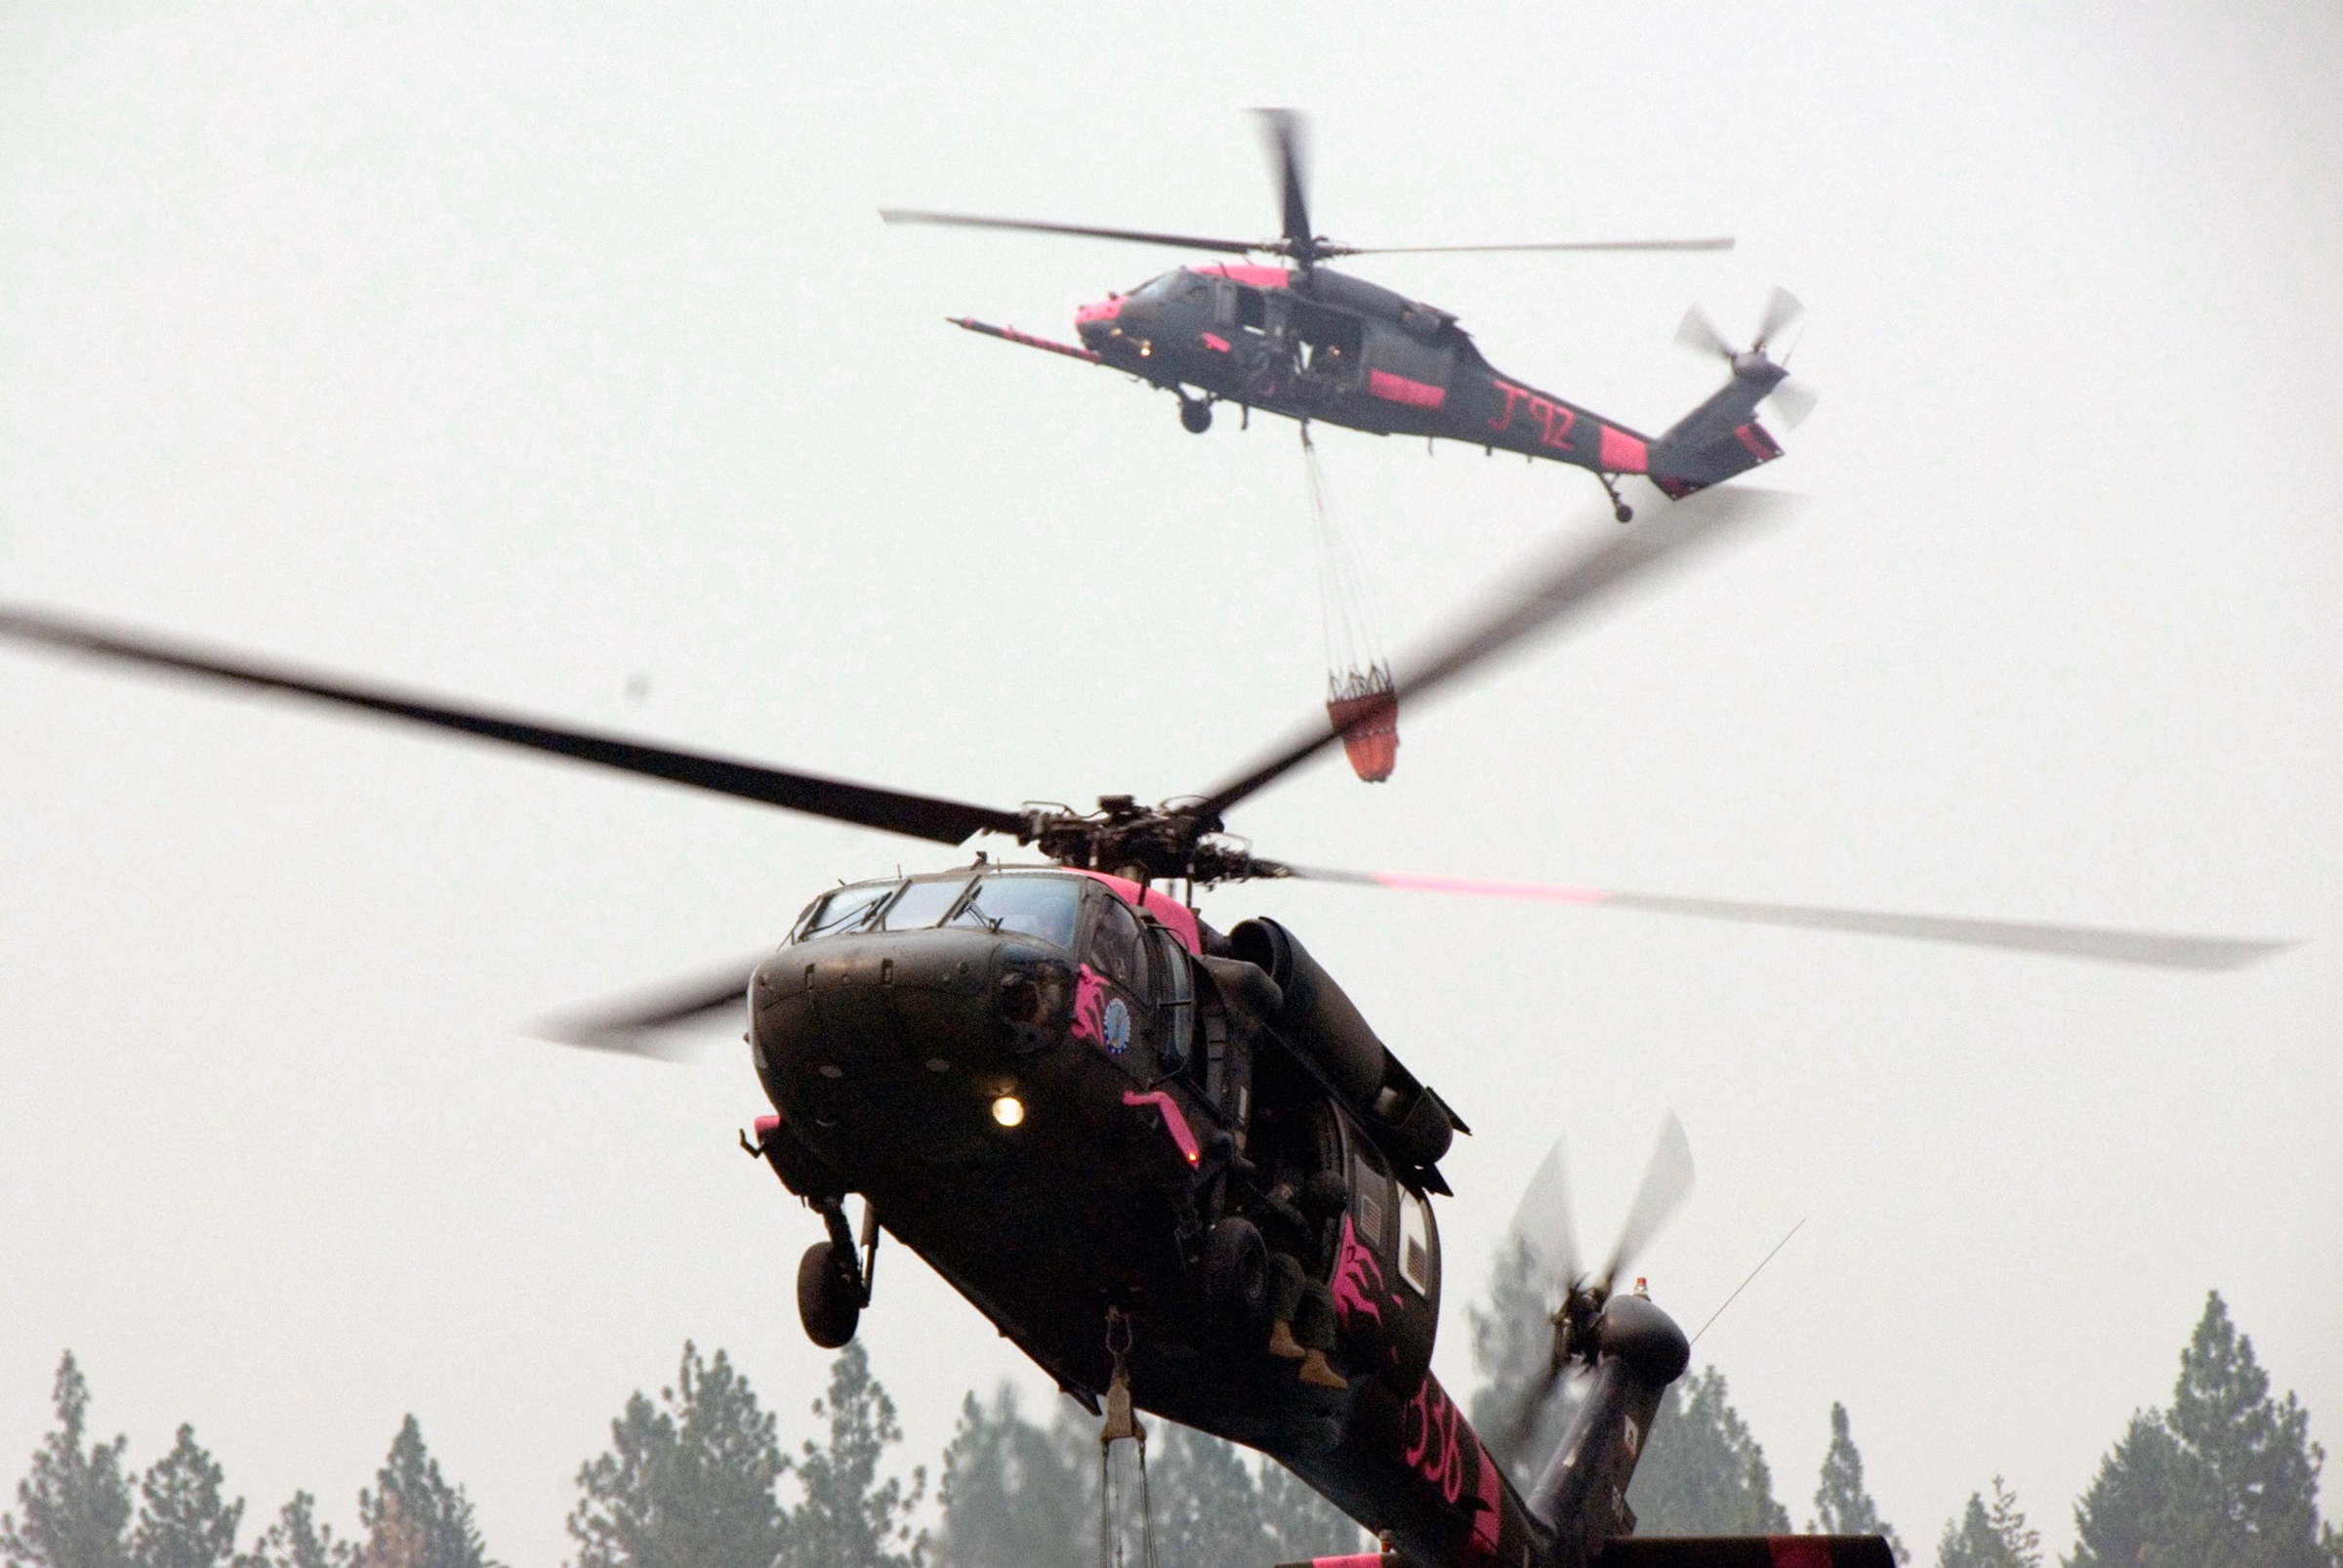 Two rescue helicopters hover above a line of pine trees. A water bucket attached with long cables is seen hanging from the bottom of one helicopter.